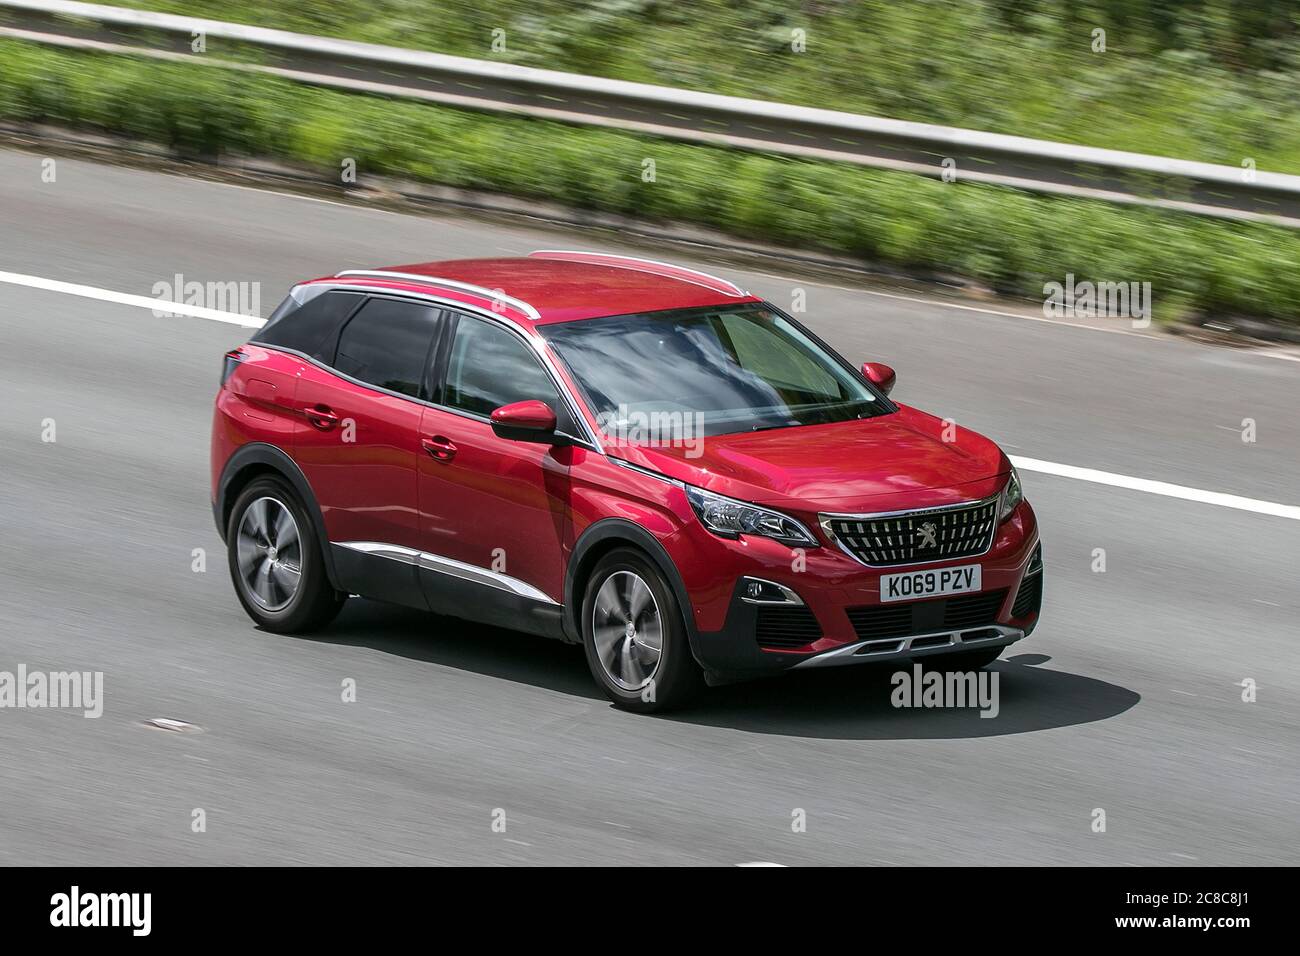 A 2020 Peugeot 3008 Allure Bluehdi Red Car SUV Diesel driving on the M6motorway near Preston in Lancashire, UK Stock Photo